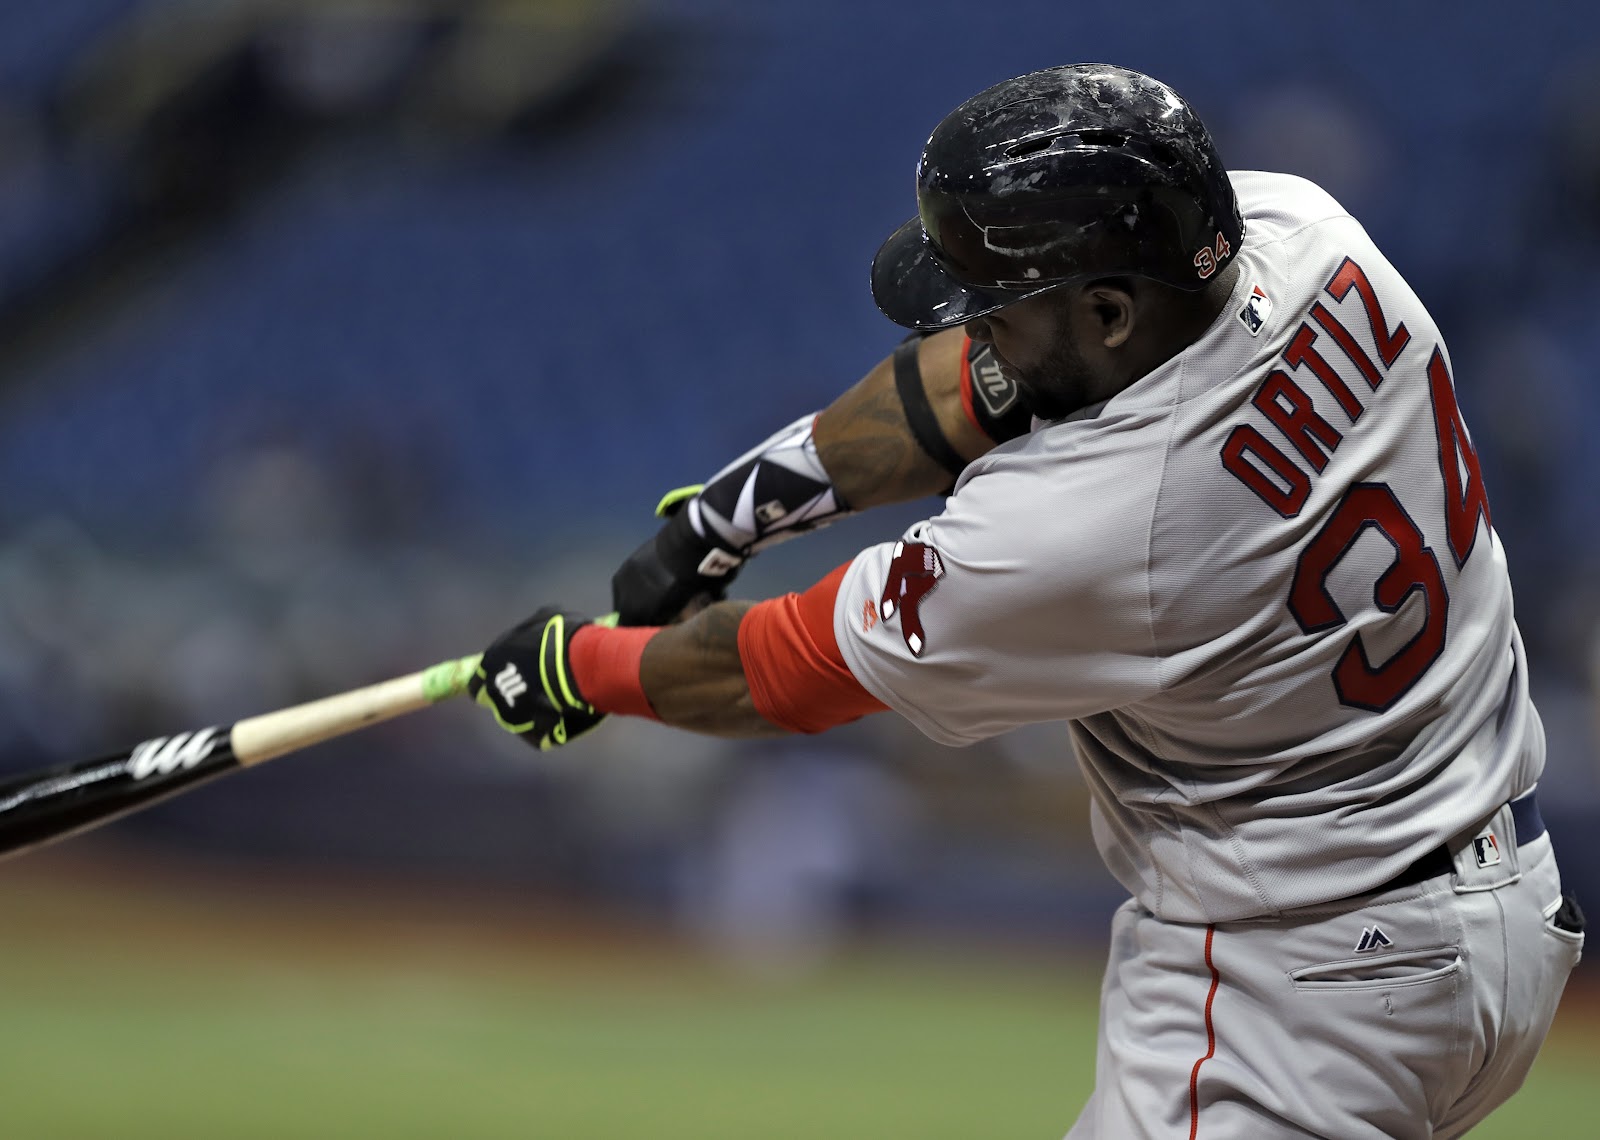 The Curse of David Ortiz: Why the Minnesota Twins will never win